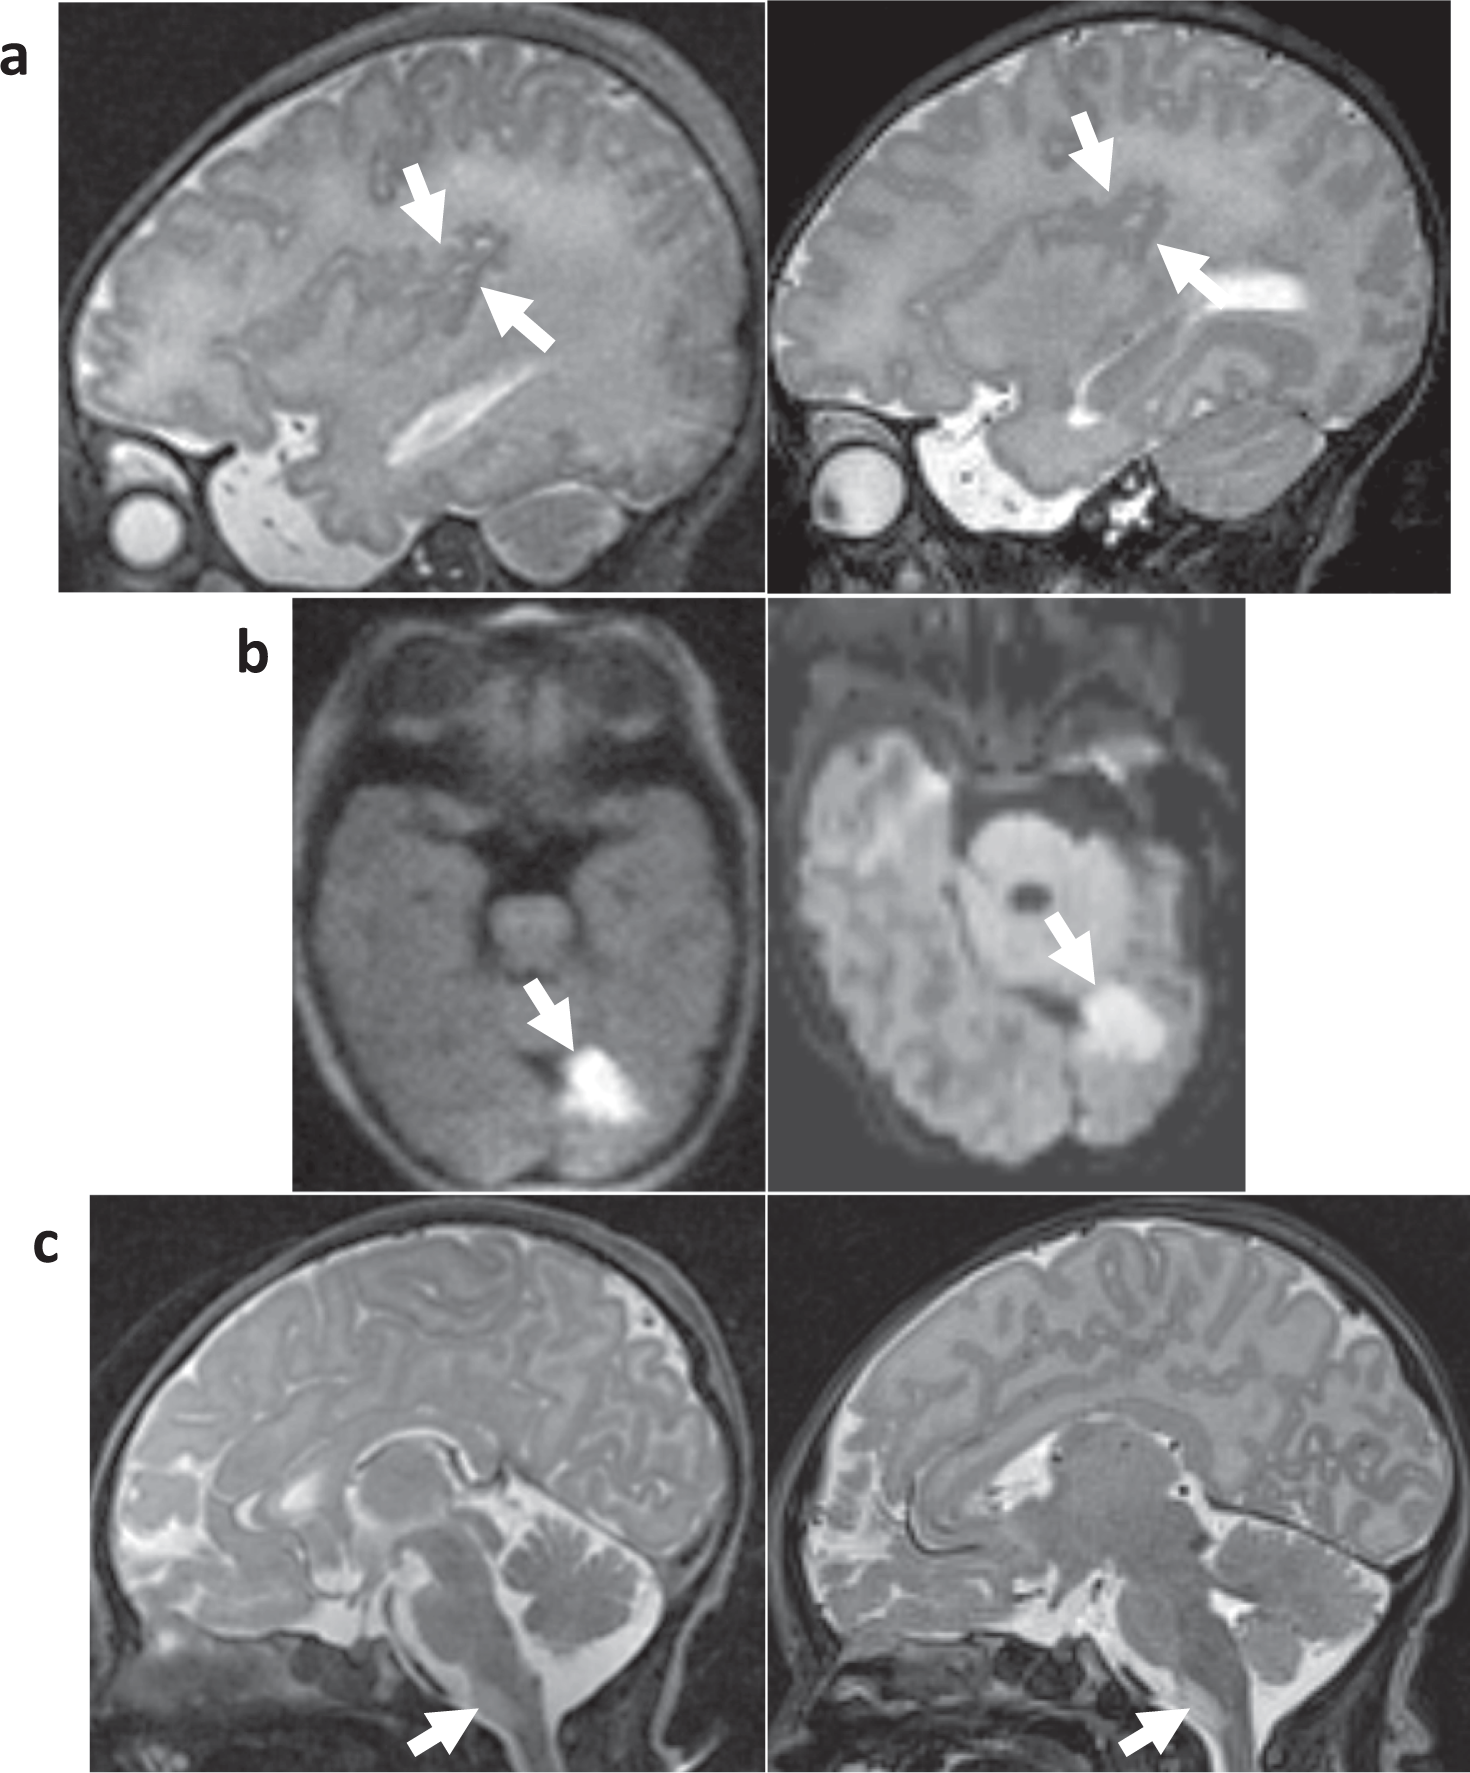 Clinical experience with an in-NICU magnetic resonance imaging system |  Journal of Perinatology